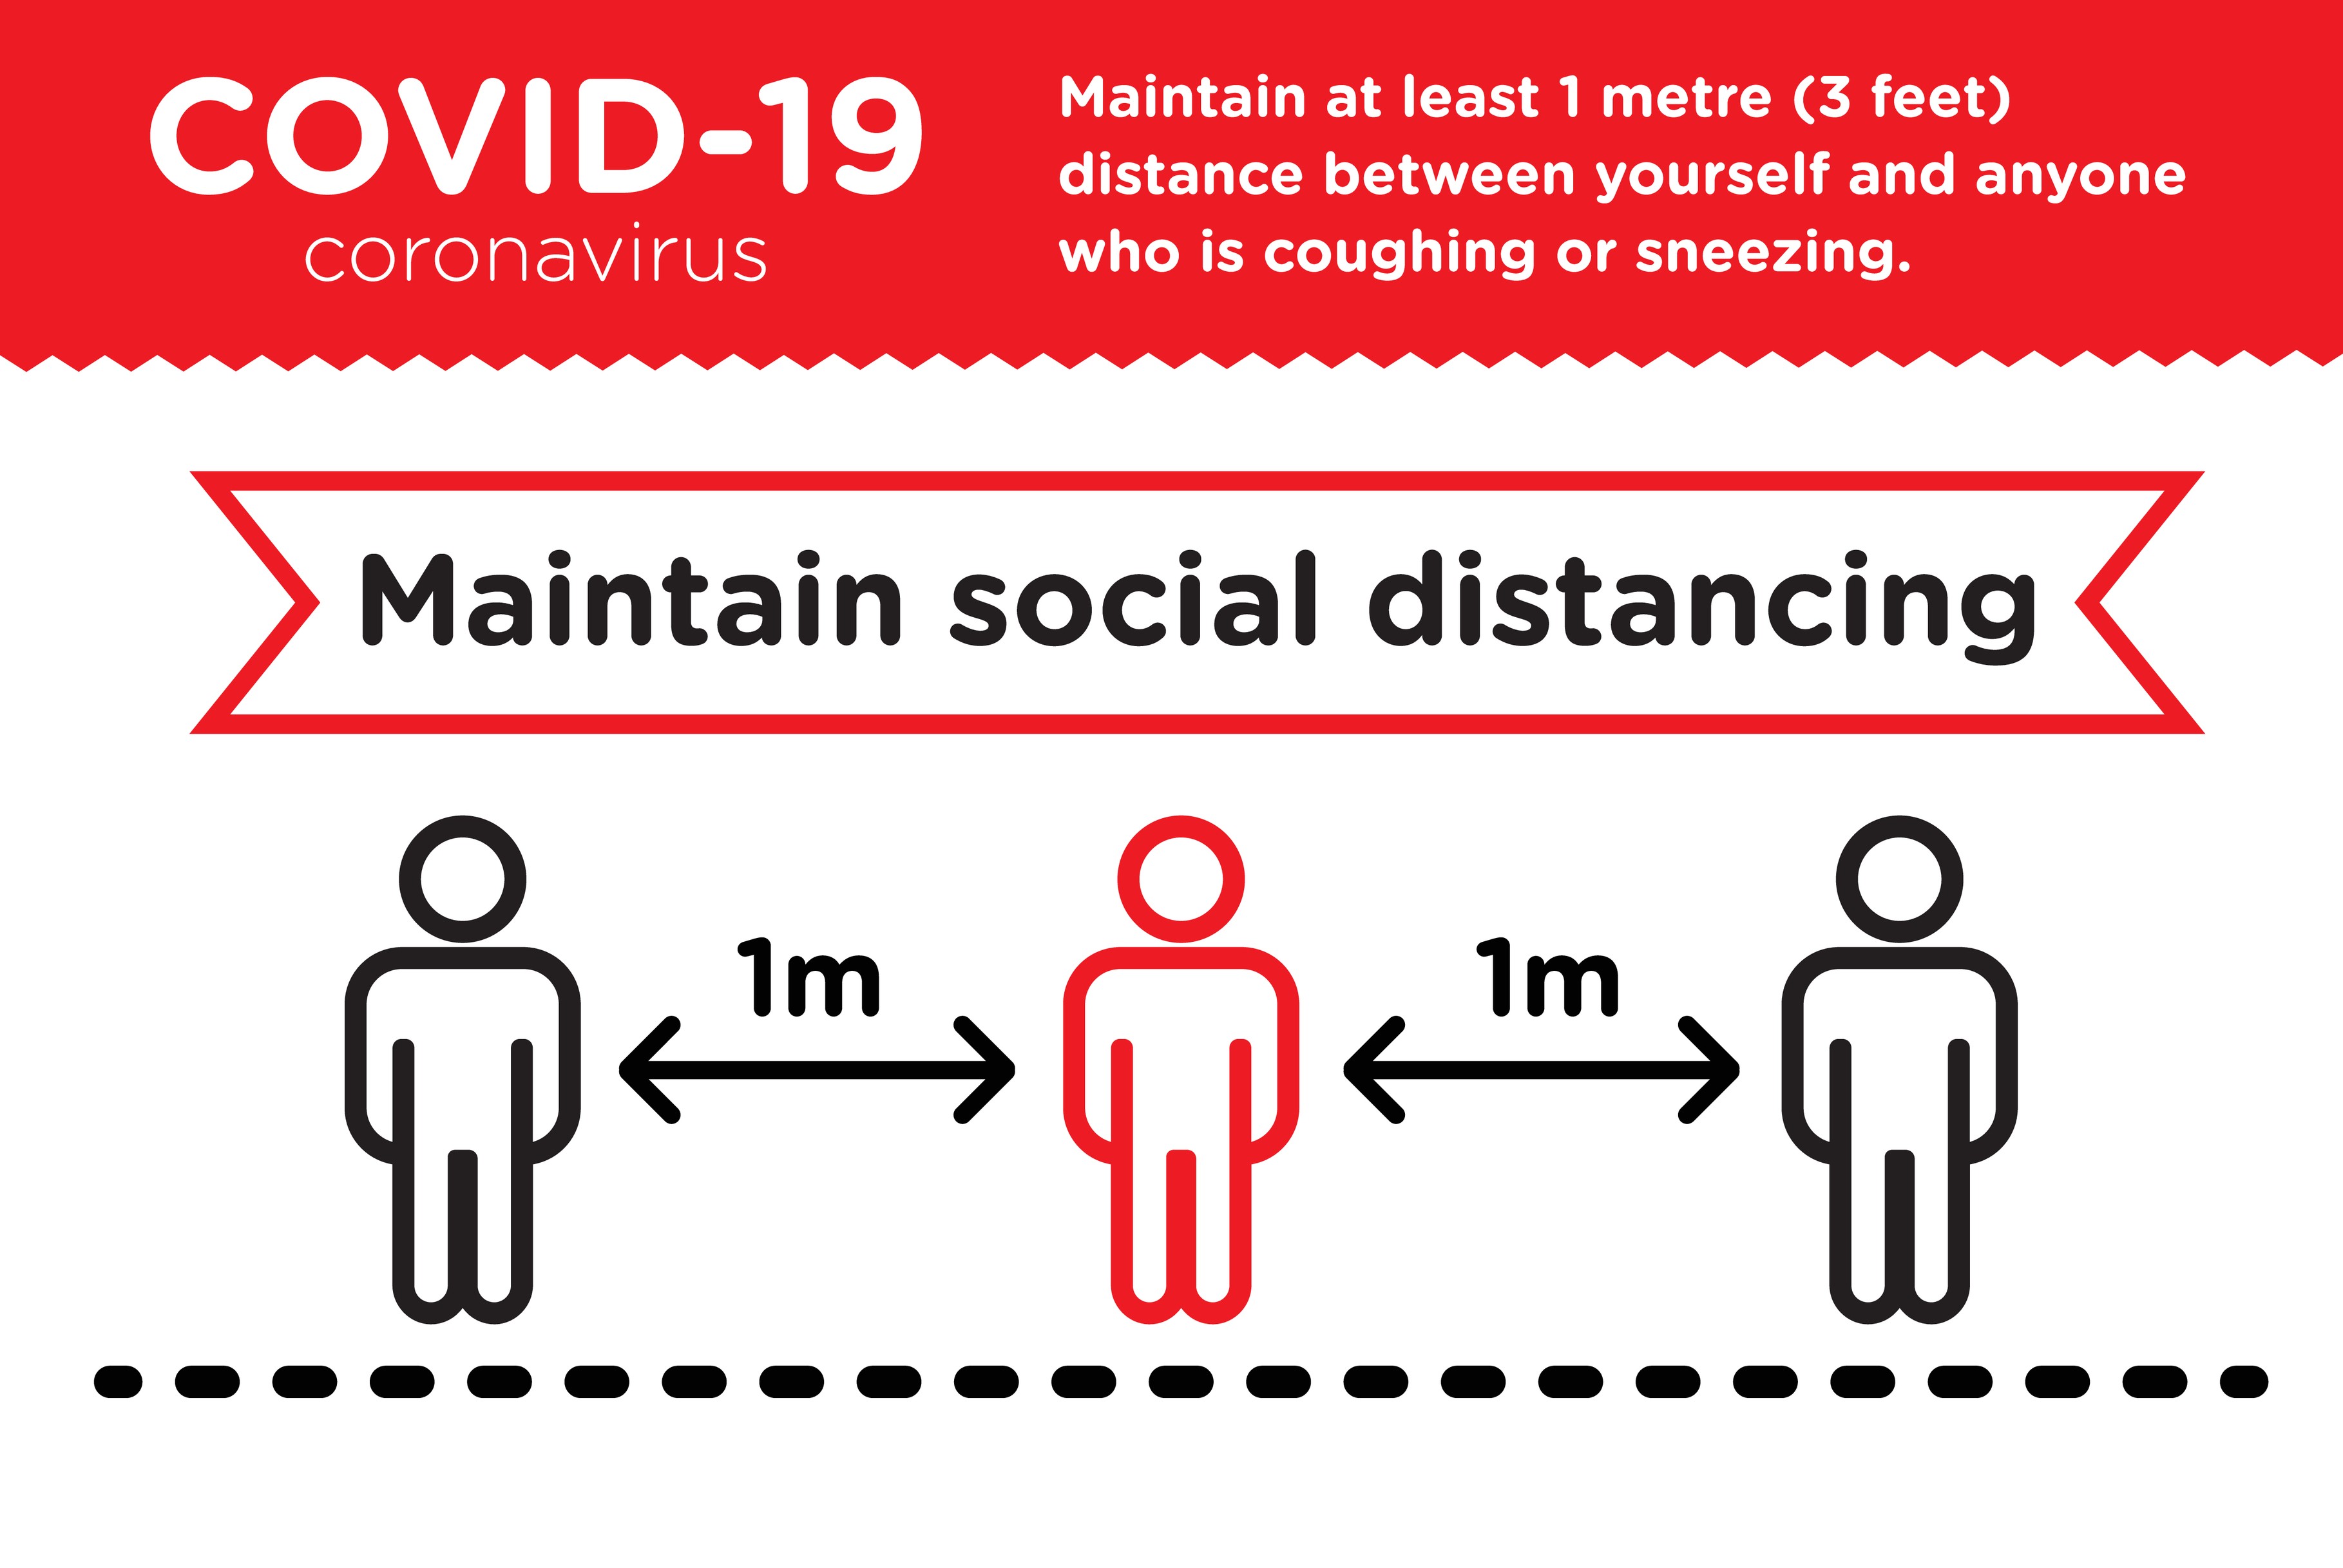 Social Distancing During